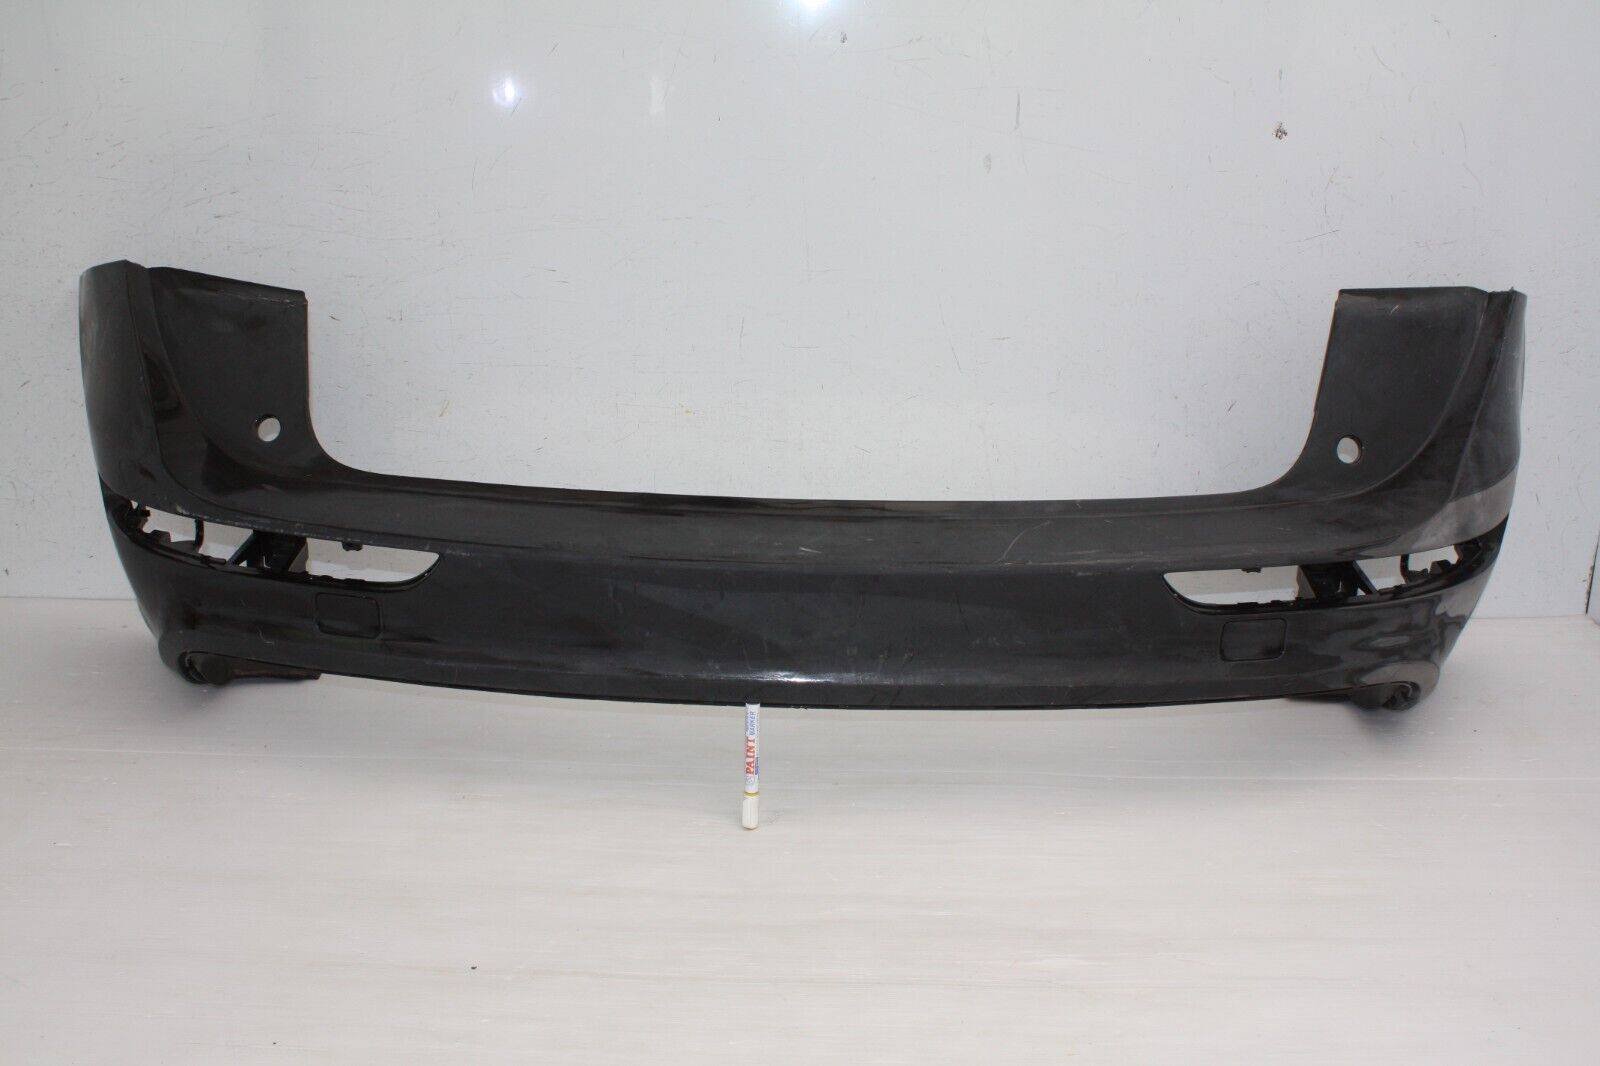 Audi-Q5-S-Line-Rear-Bumper-2012-TO-2017-8R0807511D-Genuine-REPAIRED-BEFORE-175761945629